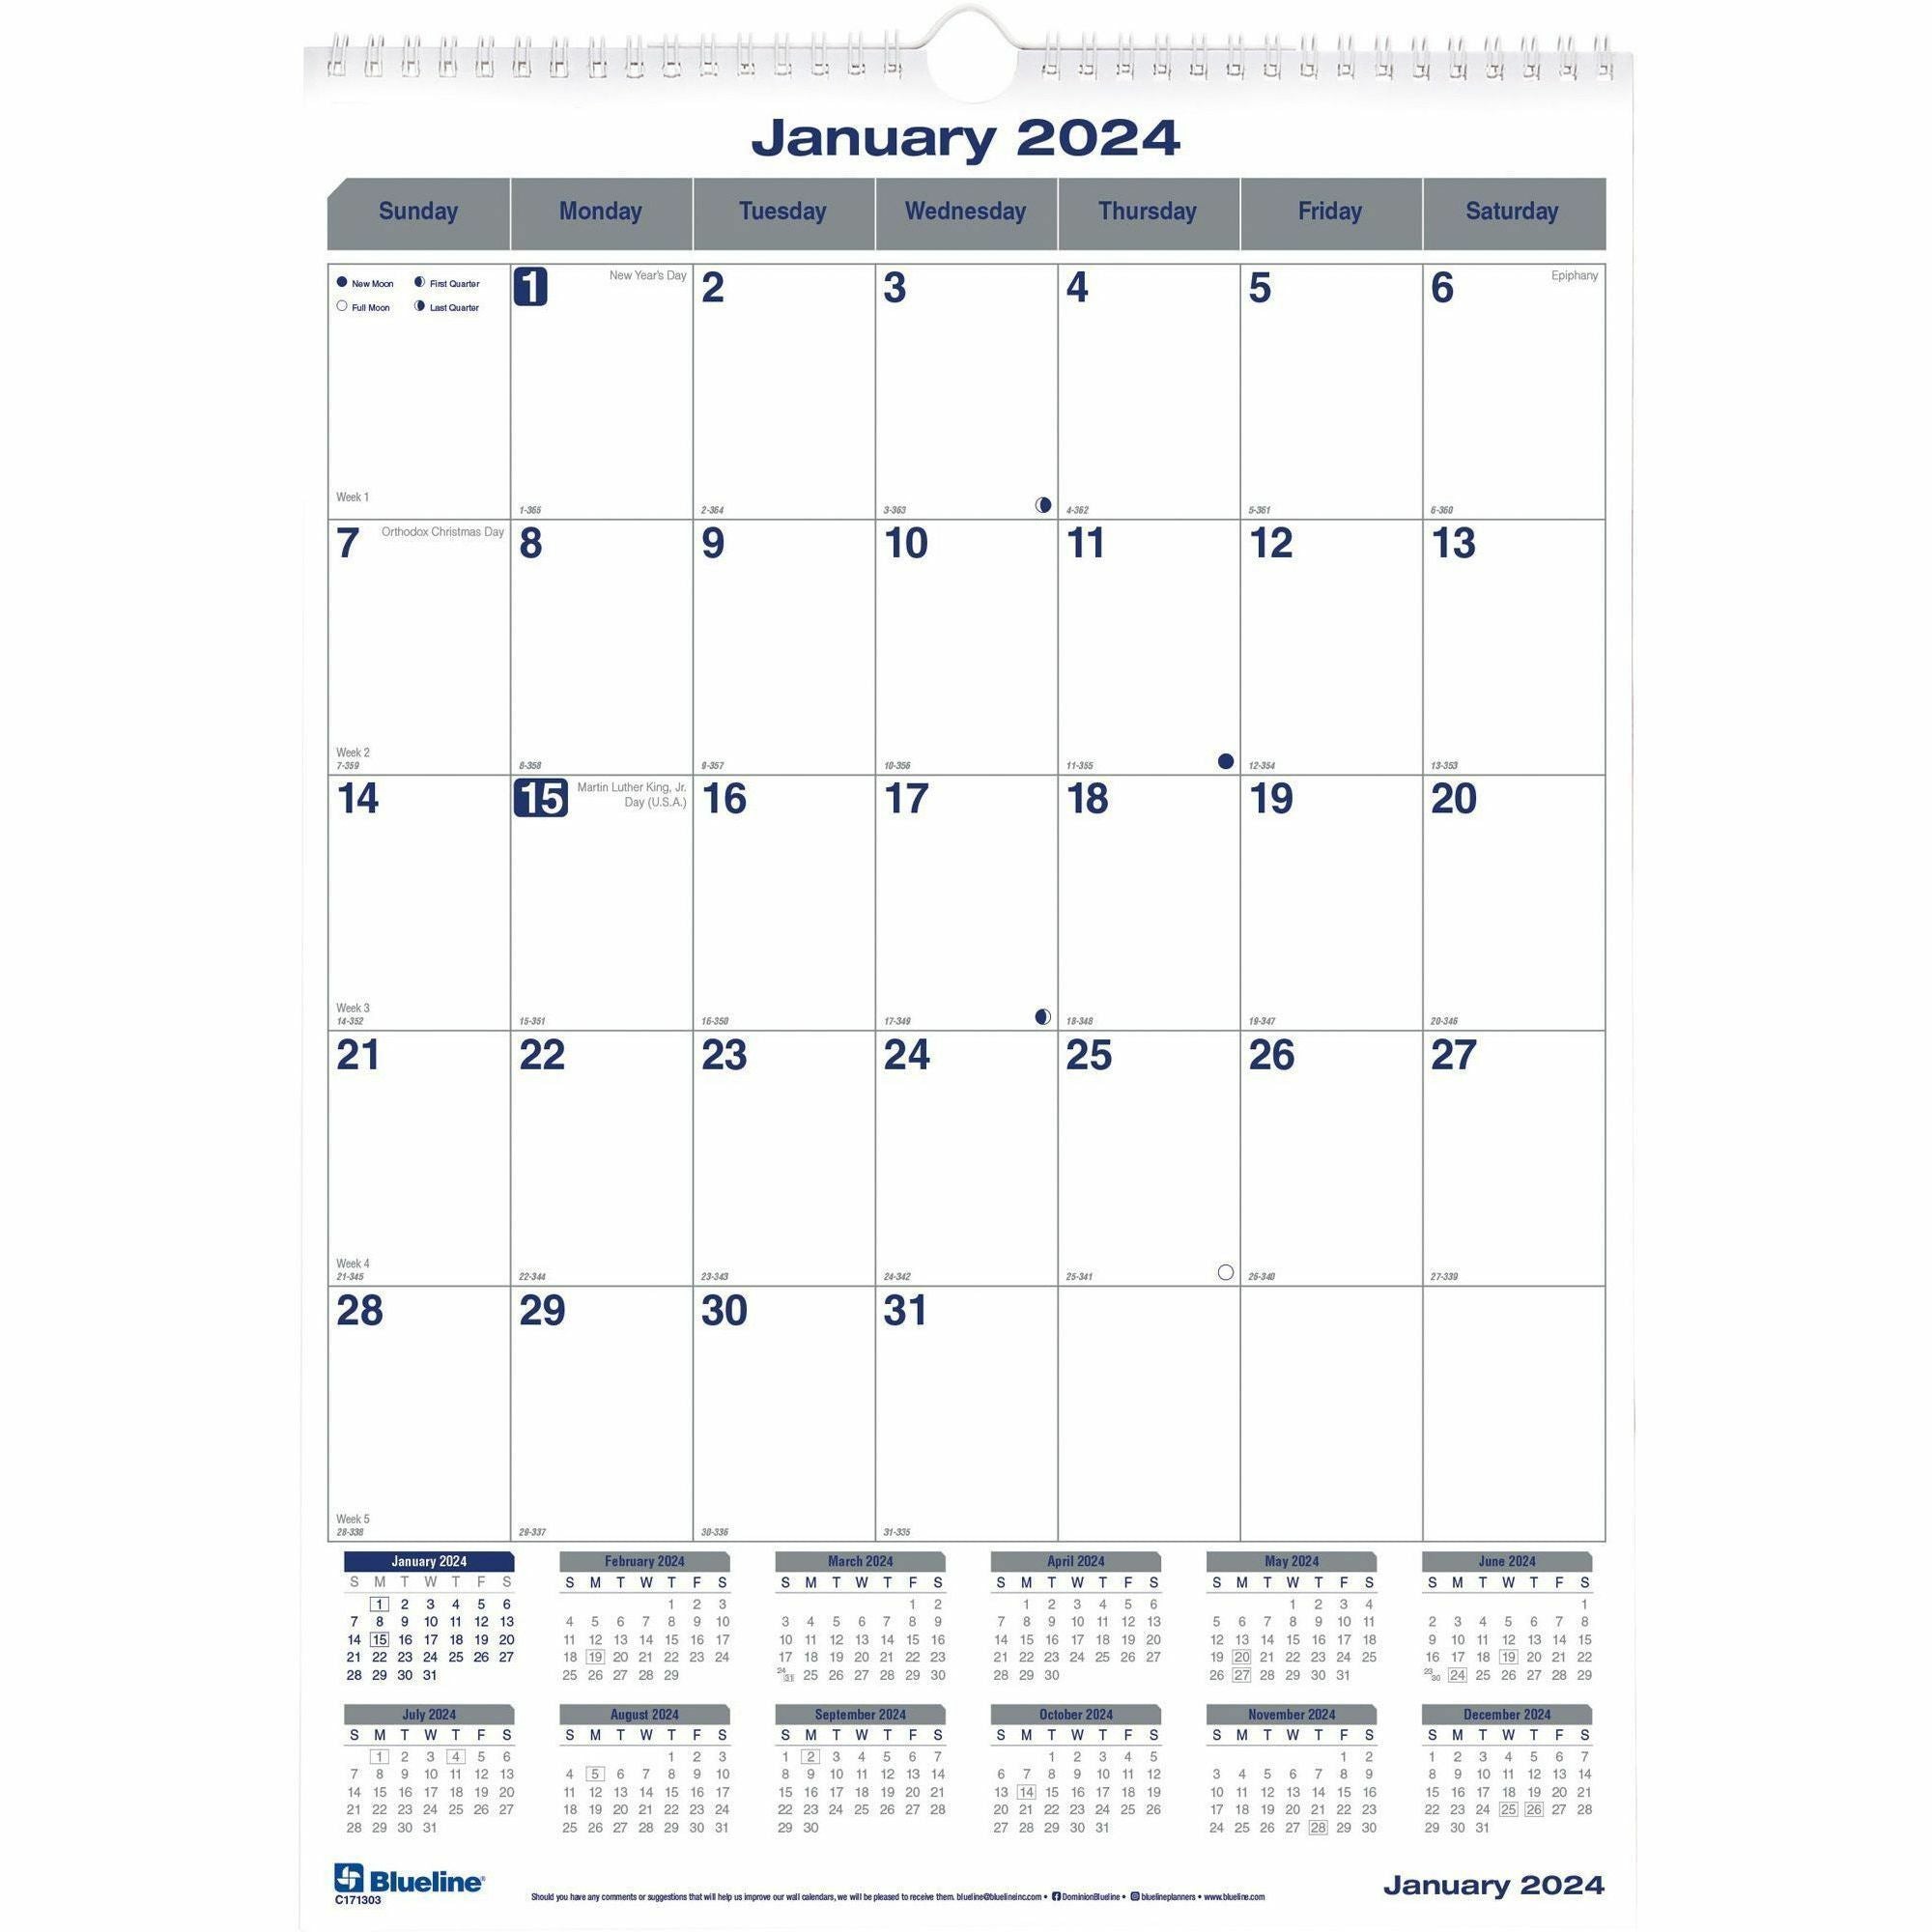 blueline-net-zero-carbon-wall-calendar-julian-dates-monthly-12-month-january-2024-december-2024-1-month-single-page-layout-12-x-17-white-sheet-twin-wire-white-chipboard-black-coverreference-calendar-reinforced-tear-off-1-e_redc171303 - 1